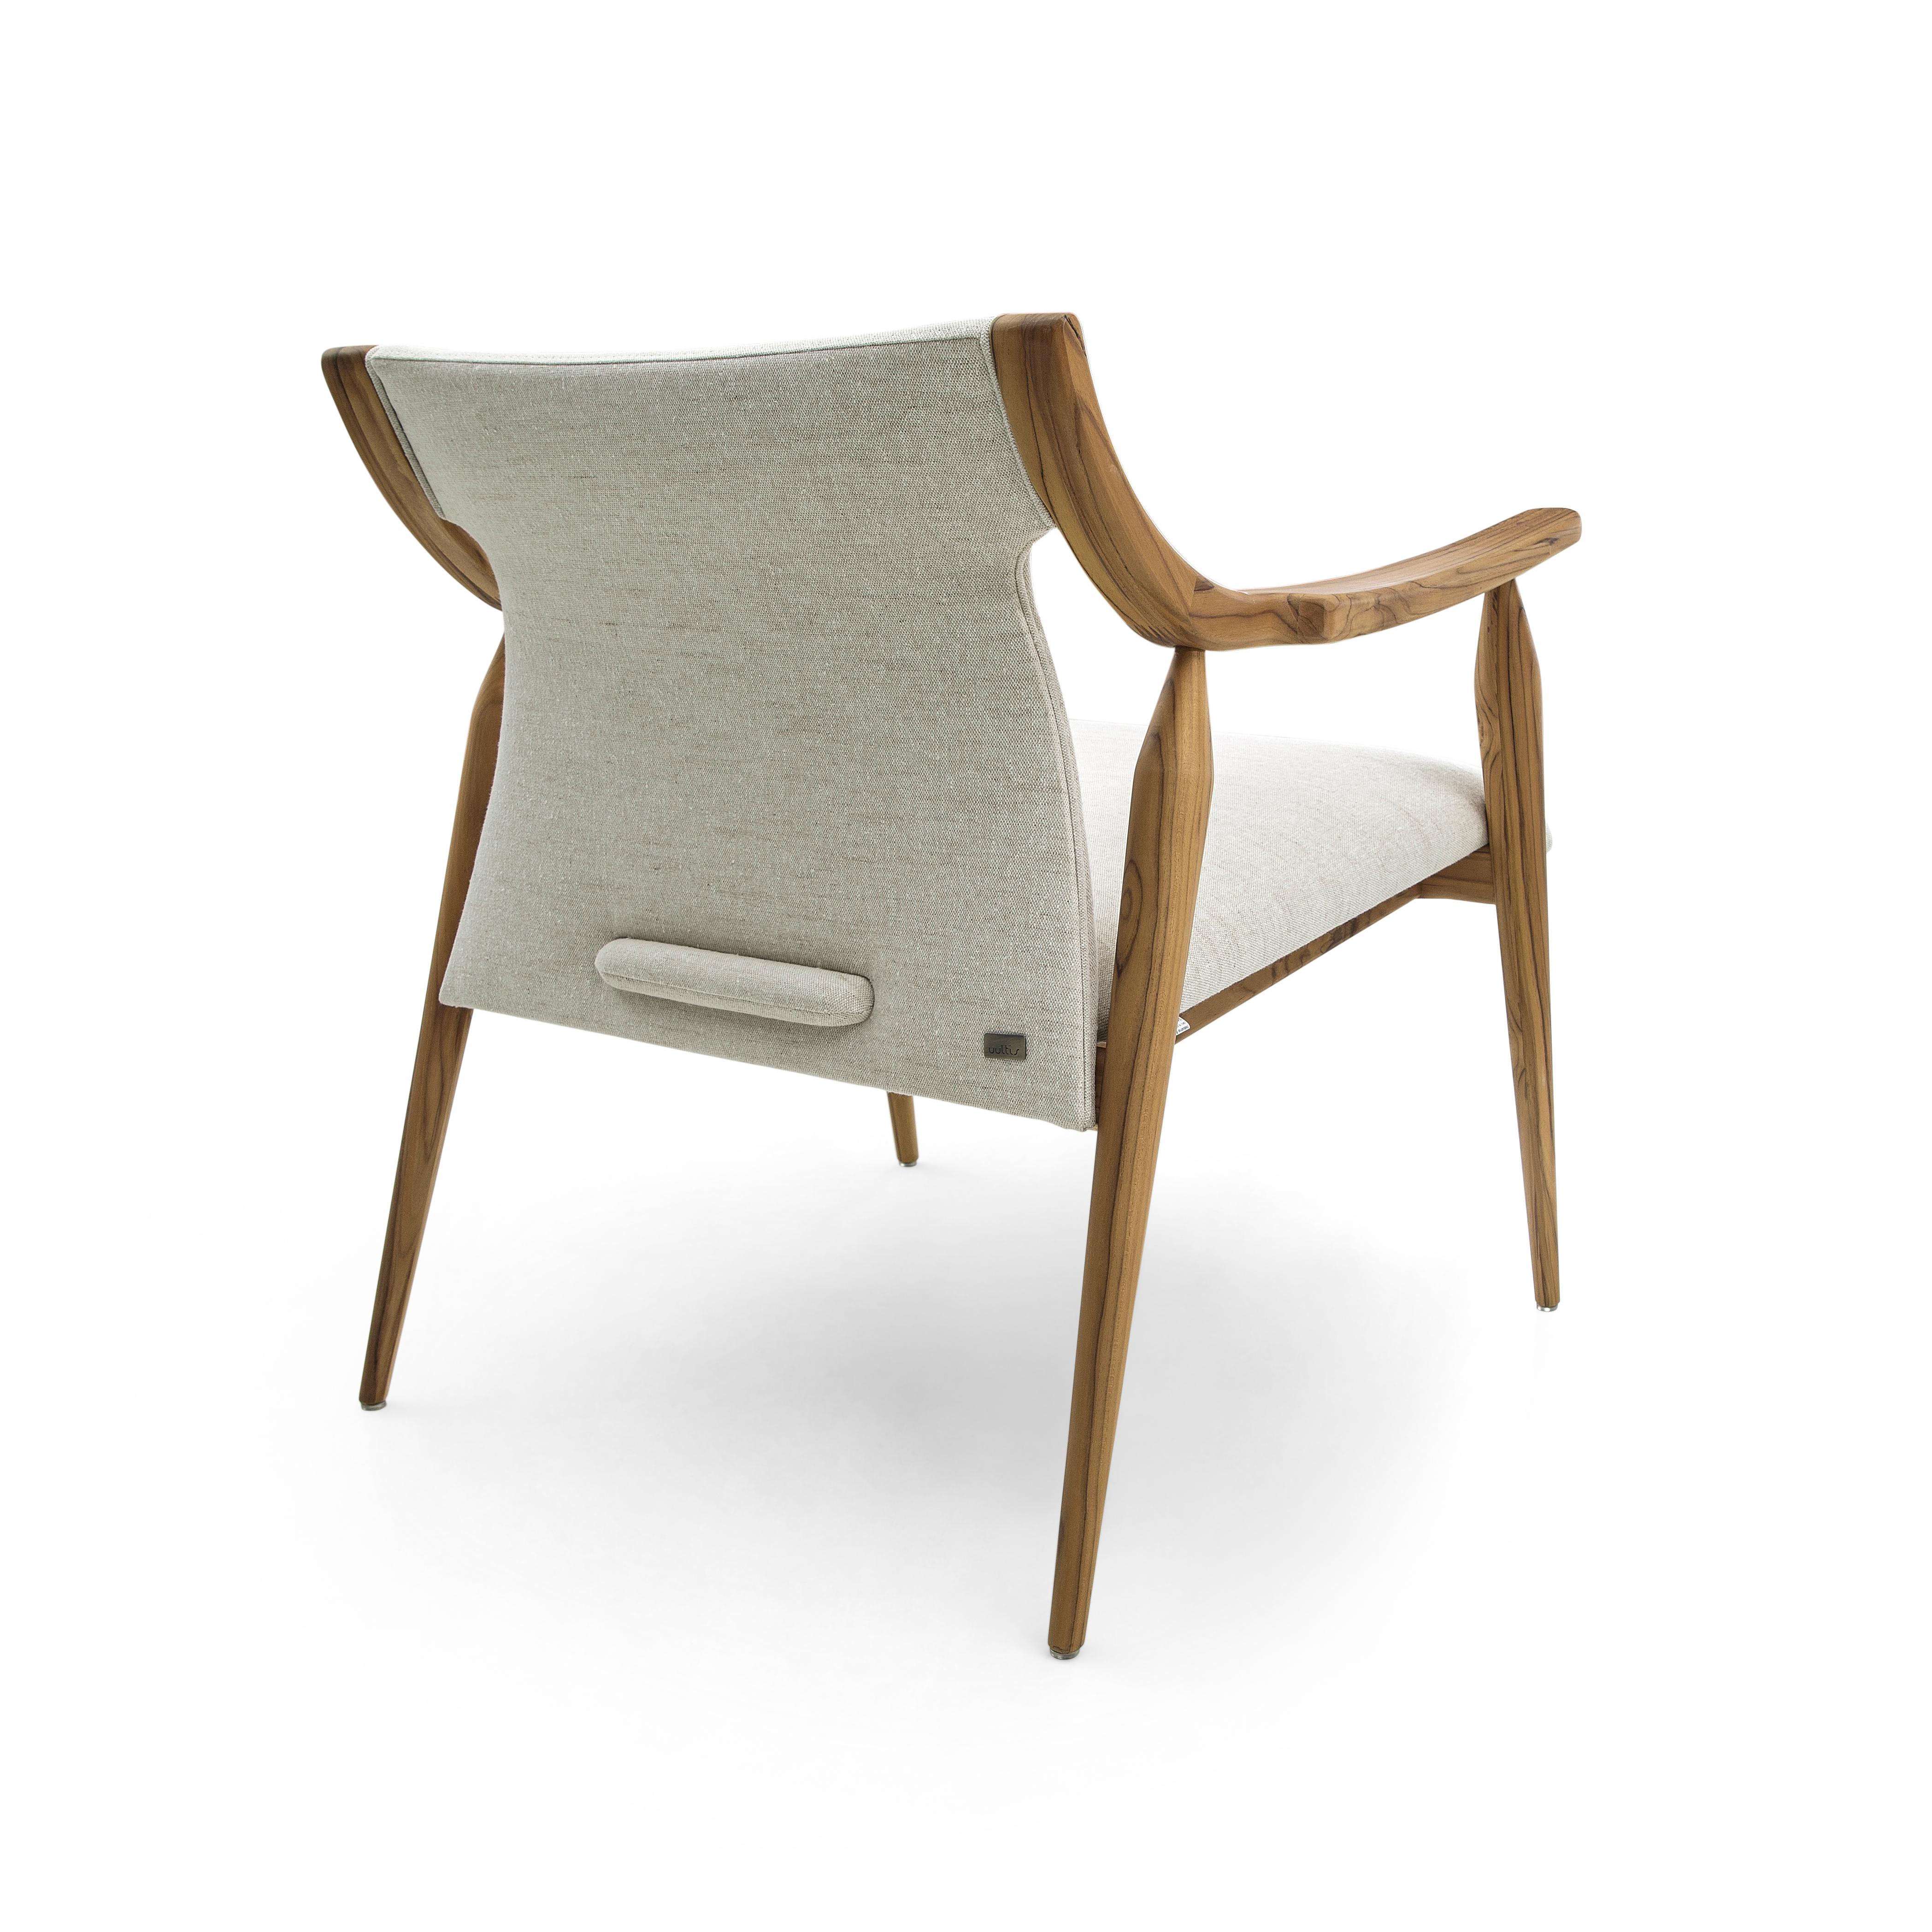 Mince Armchair Featuring Curved Arms and Spindle Legs in Teak Wood Finish For Sale 1